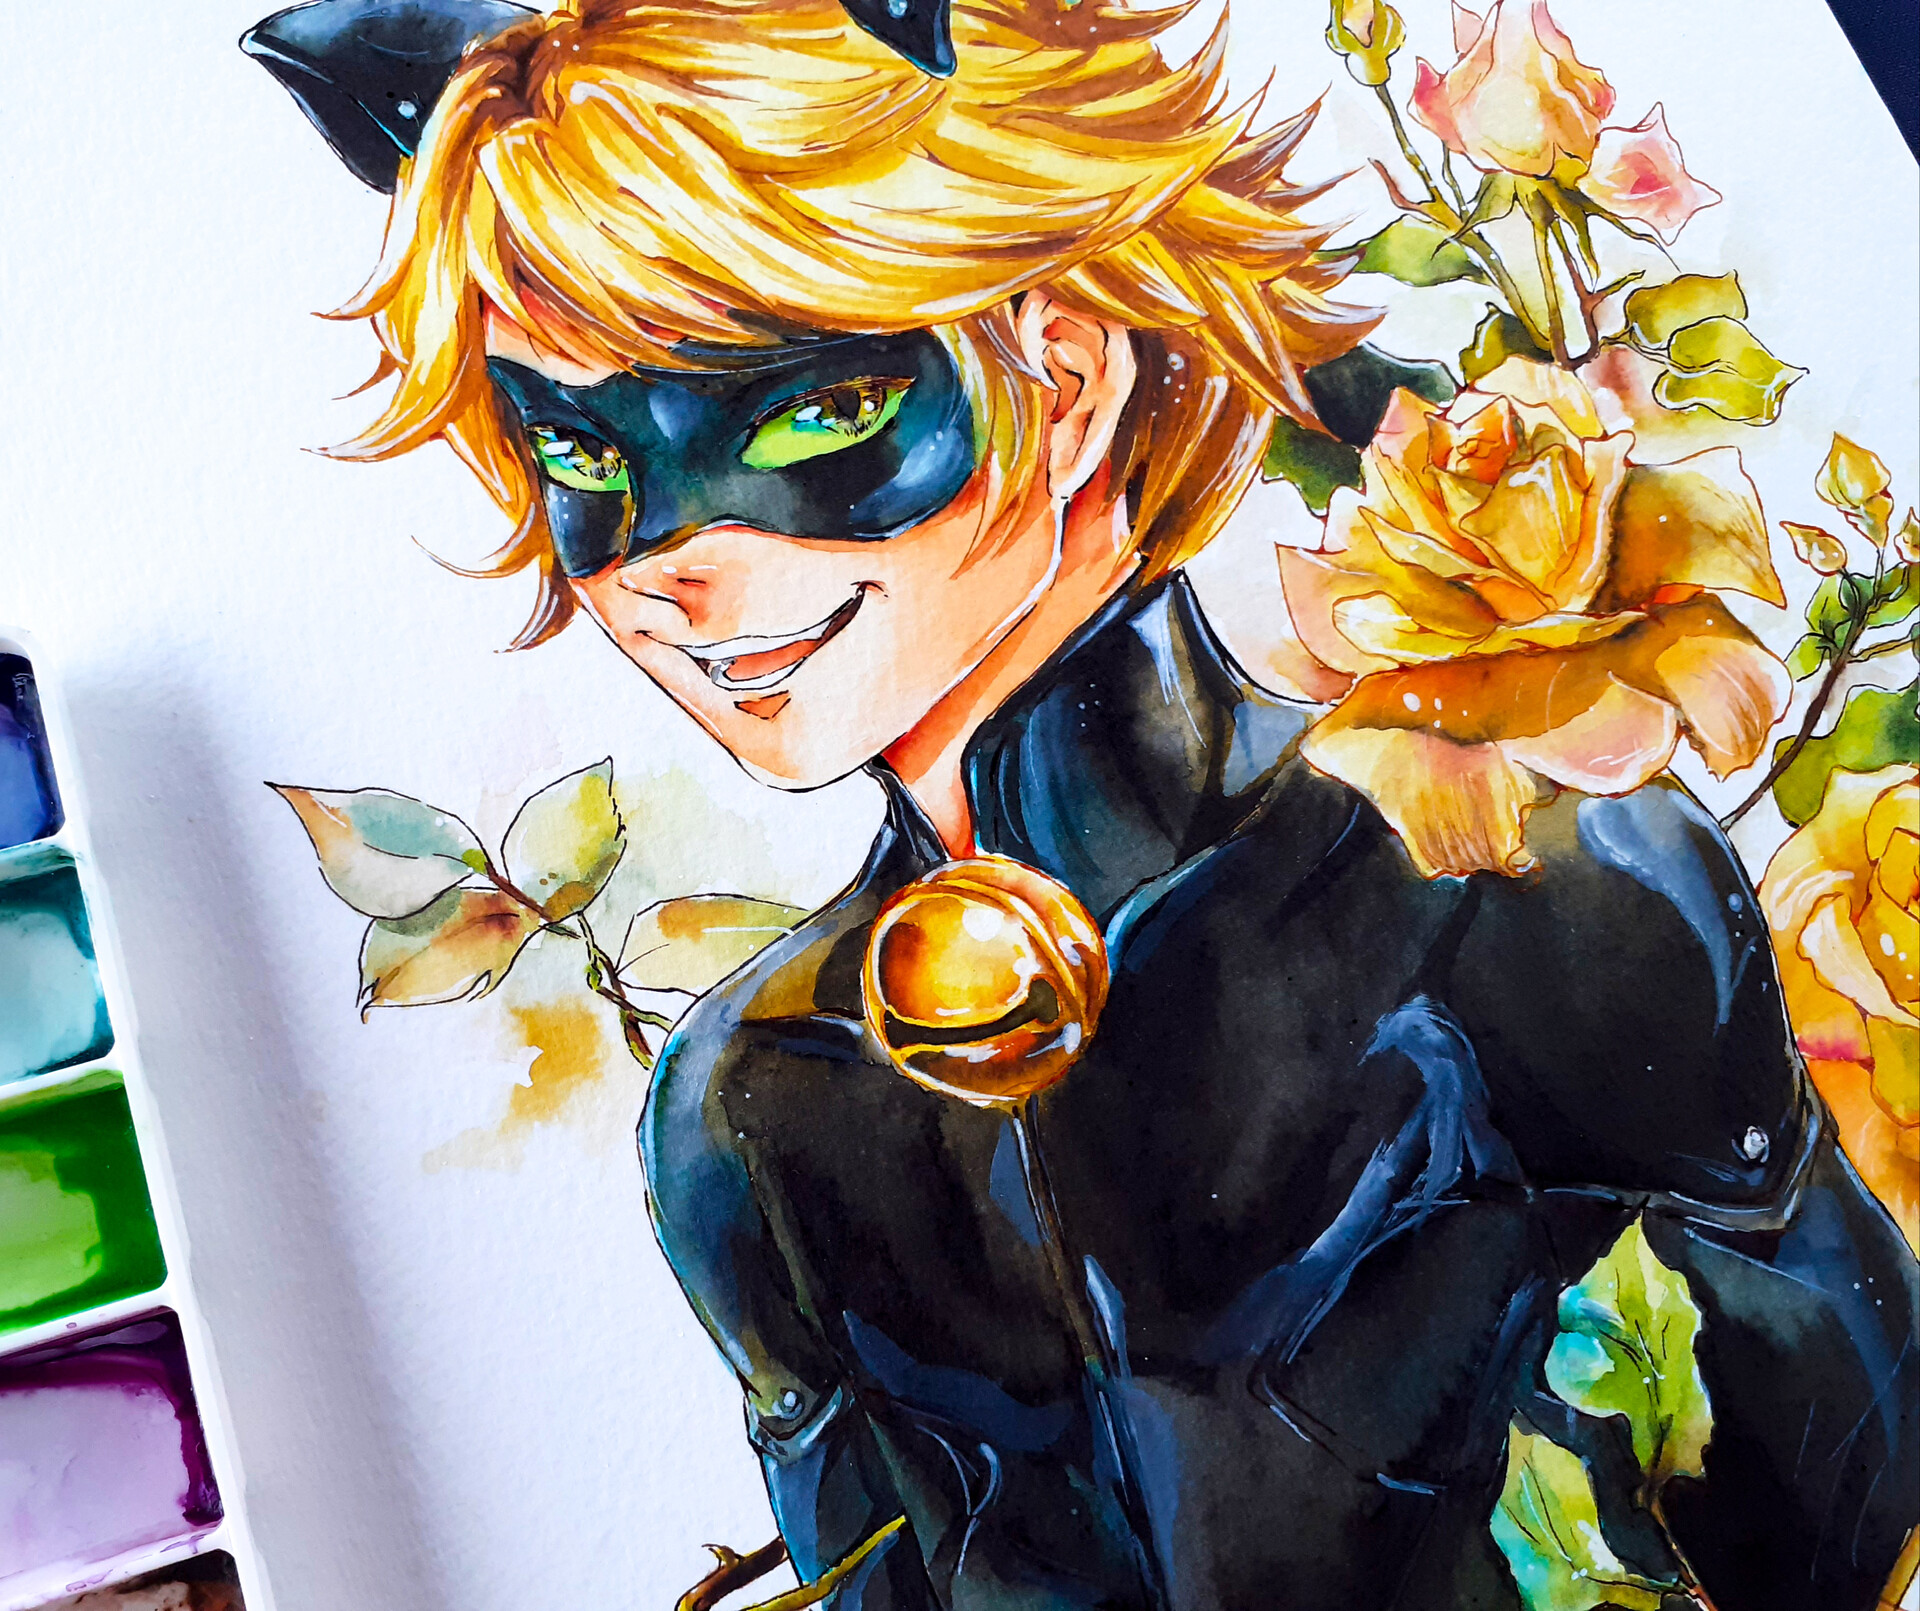 How to draw Nino from Ladybug and Cat Noir - Sketchok easy drawing guides